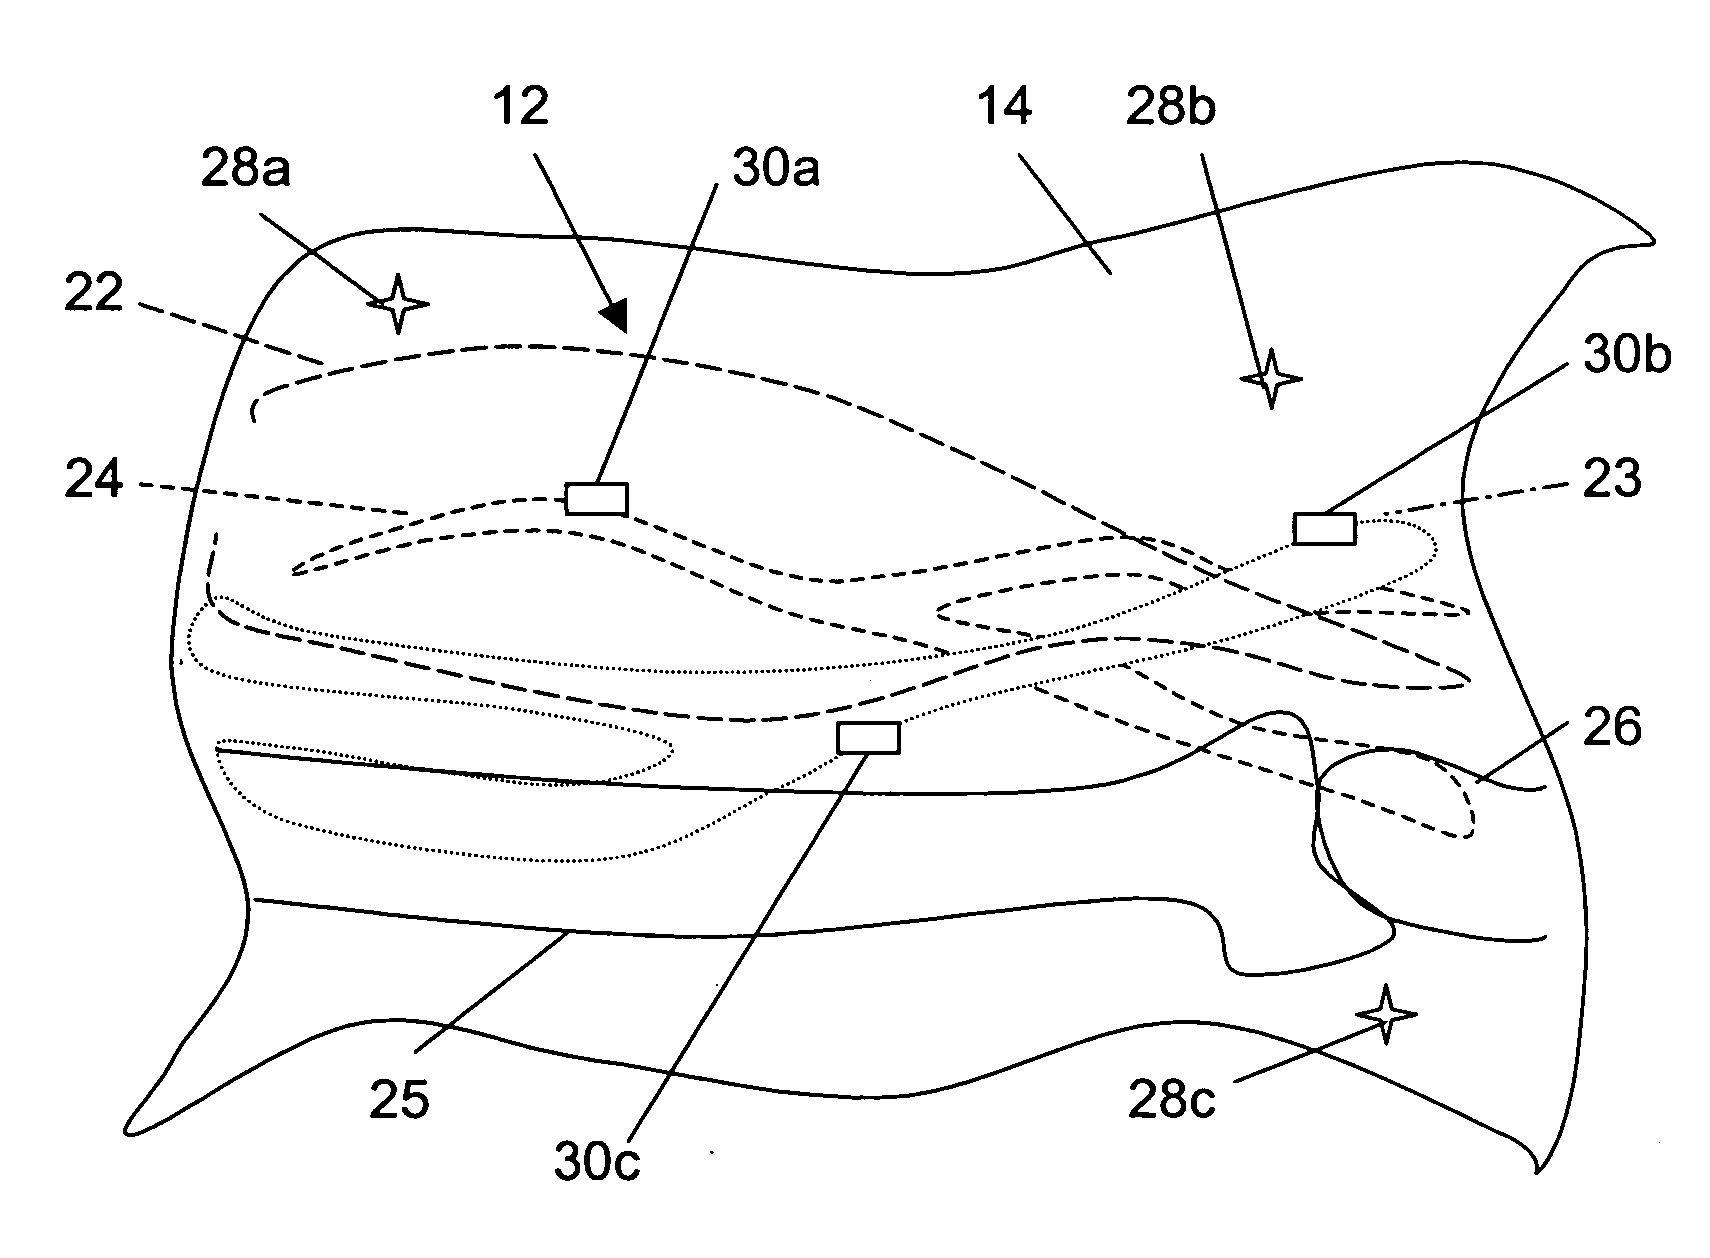 Medical method and associated apparatus utilizable in accessing internal organs through skin surface